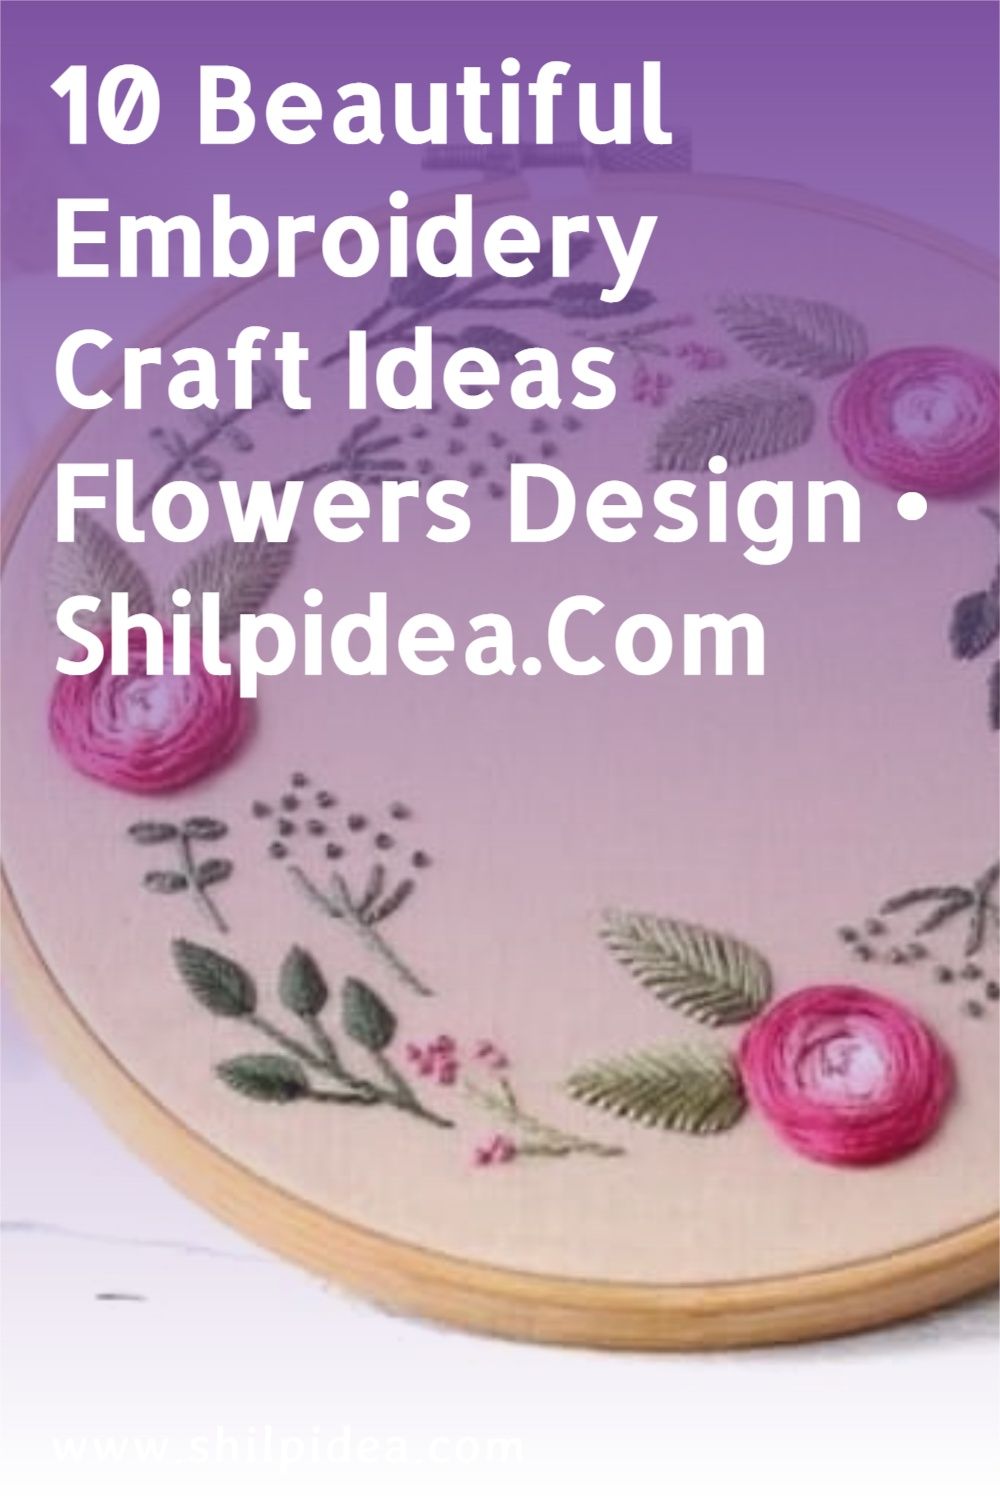 embroidery-craft-flowers-design-ideas-shilpidea-pin